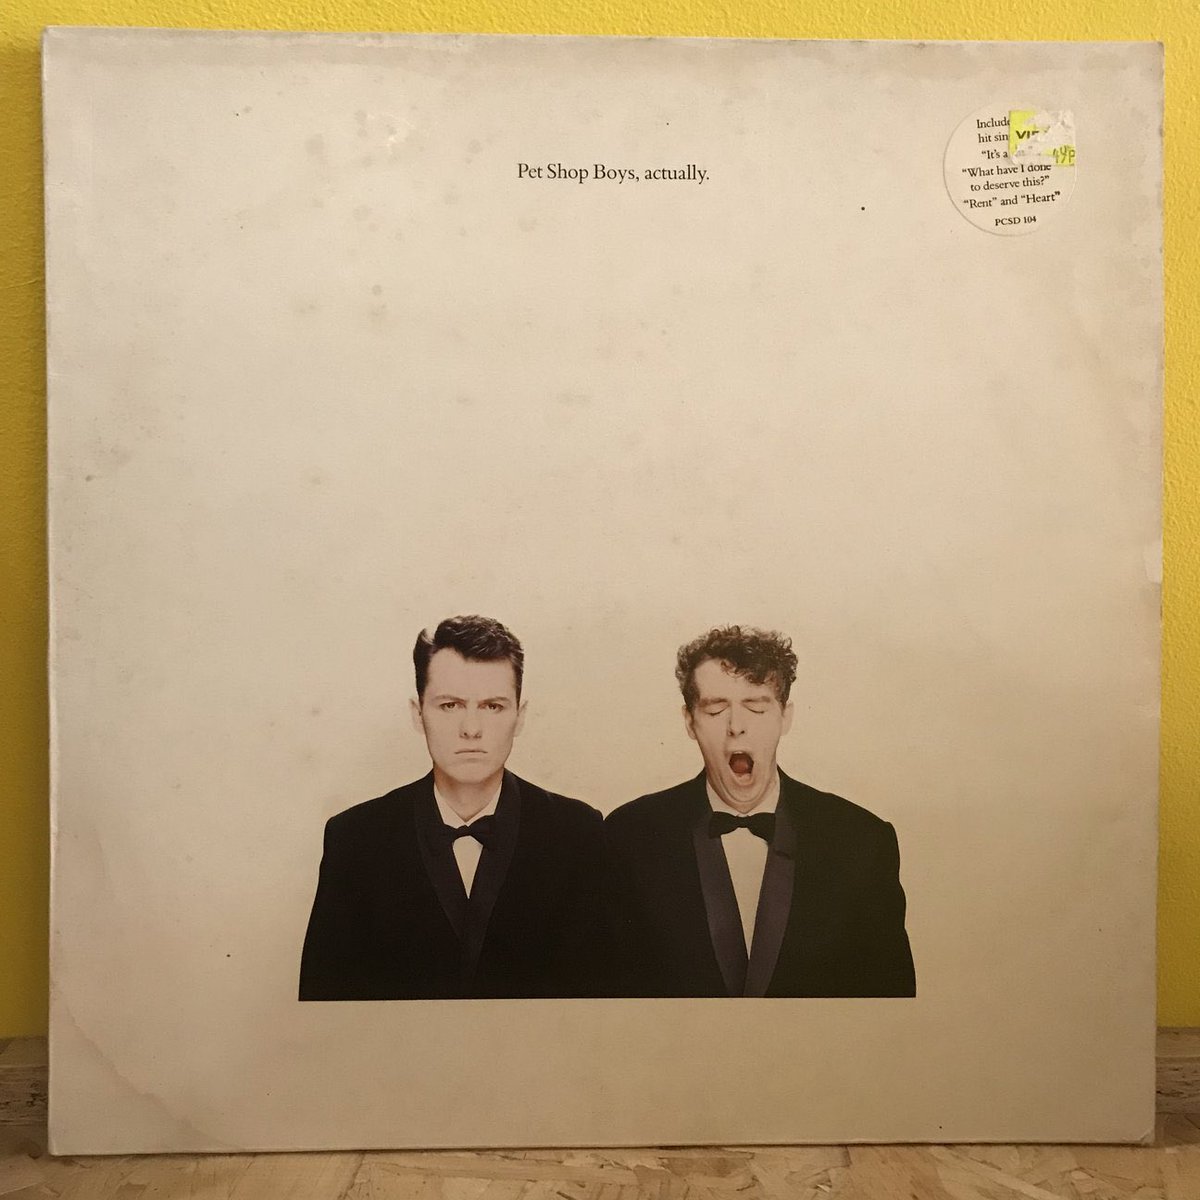 No2!
Actually we think this Pet Shop Boys classic makes a brilliant Christmas gift. 

Actually pick it up here: bit.ly/2Mfpad9

#music #vinyl #records #vinylrecord #vinylrecords #vinylcollection #vinylcollector #christmasgifts #atomicldn #christmas #xmas
#petshopboys